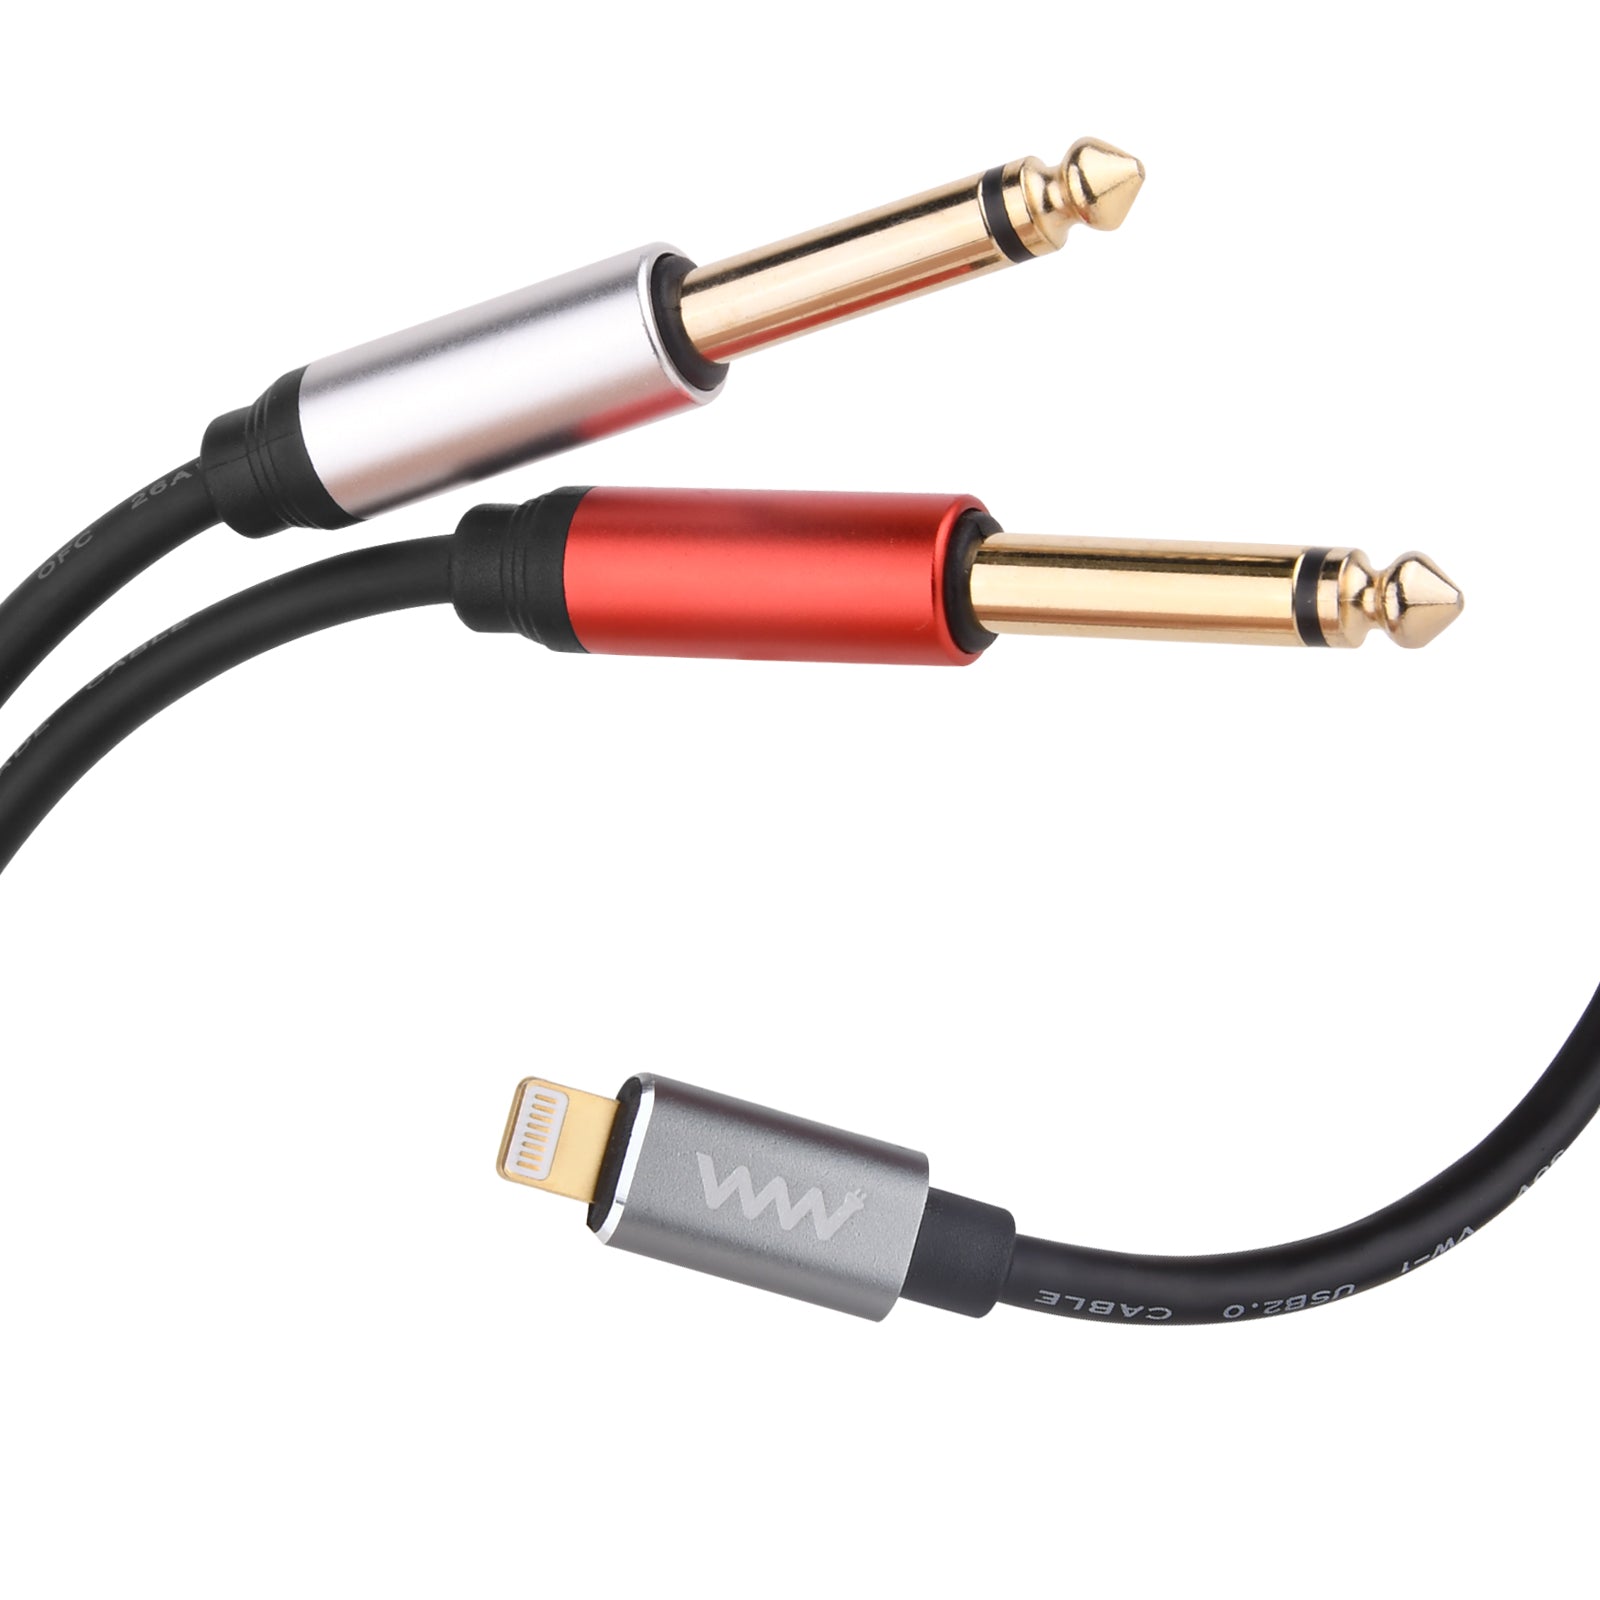 8 Pin to Dual 6.35mm Audio Cable For Amplifier Mixing iPhone iPad 3m